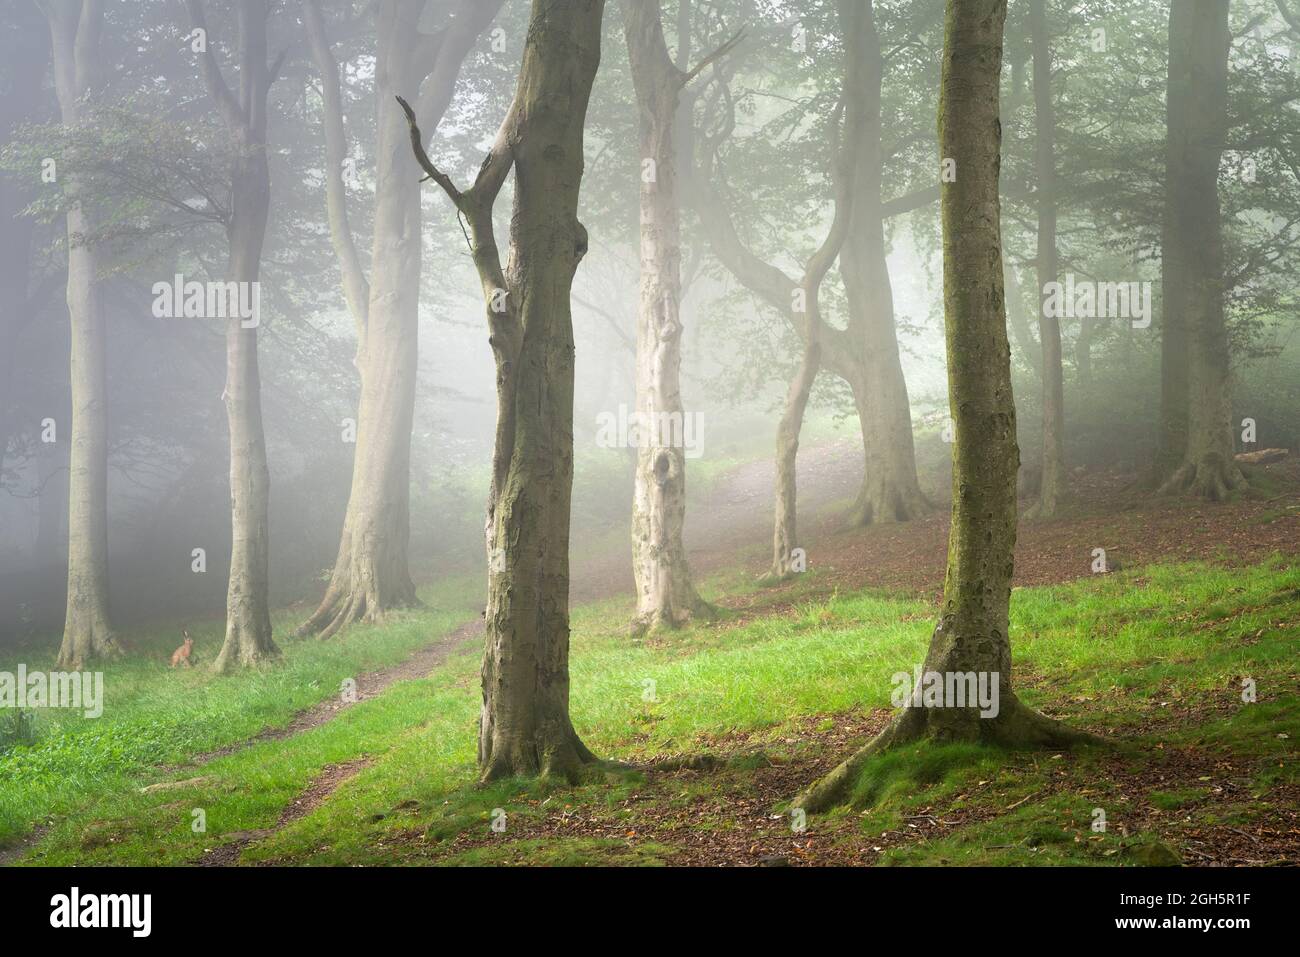 A misty woodland scene in Otley Chevin Forest Park is enhanced by the unexpected addition of a hare that ambled into the frame. Stock Photo